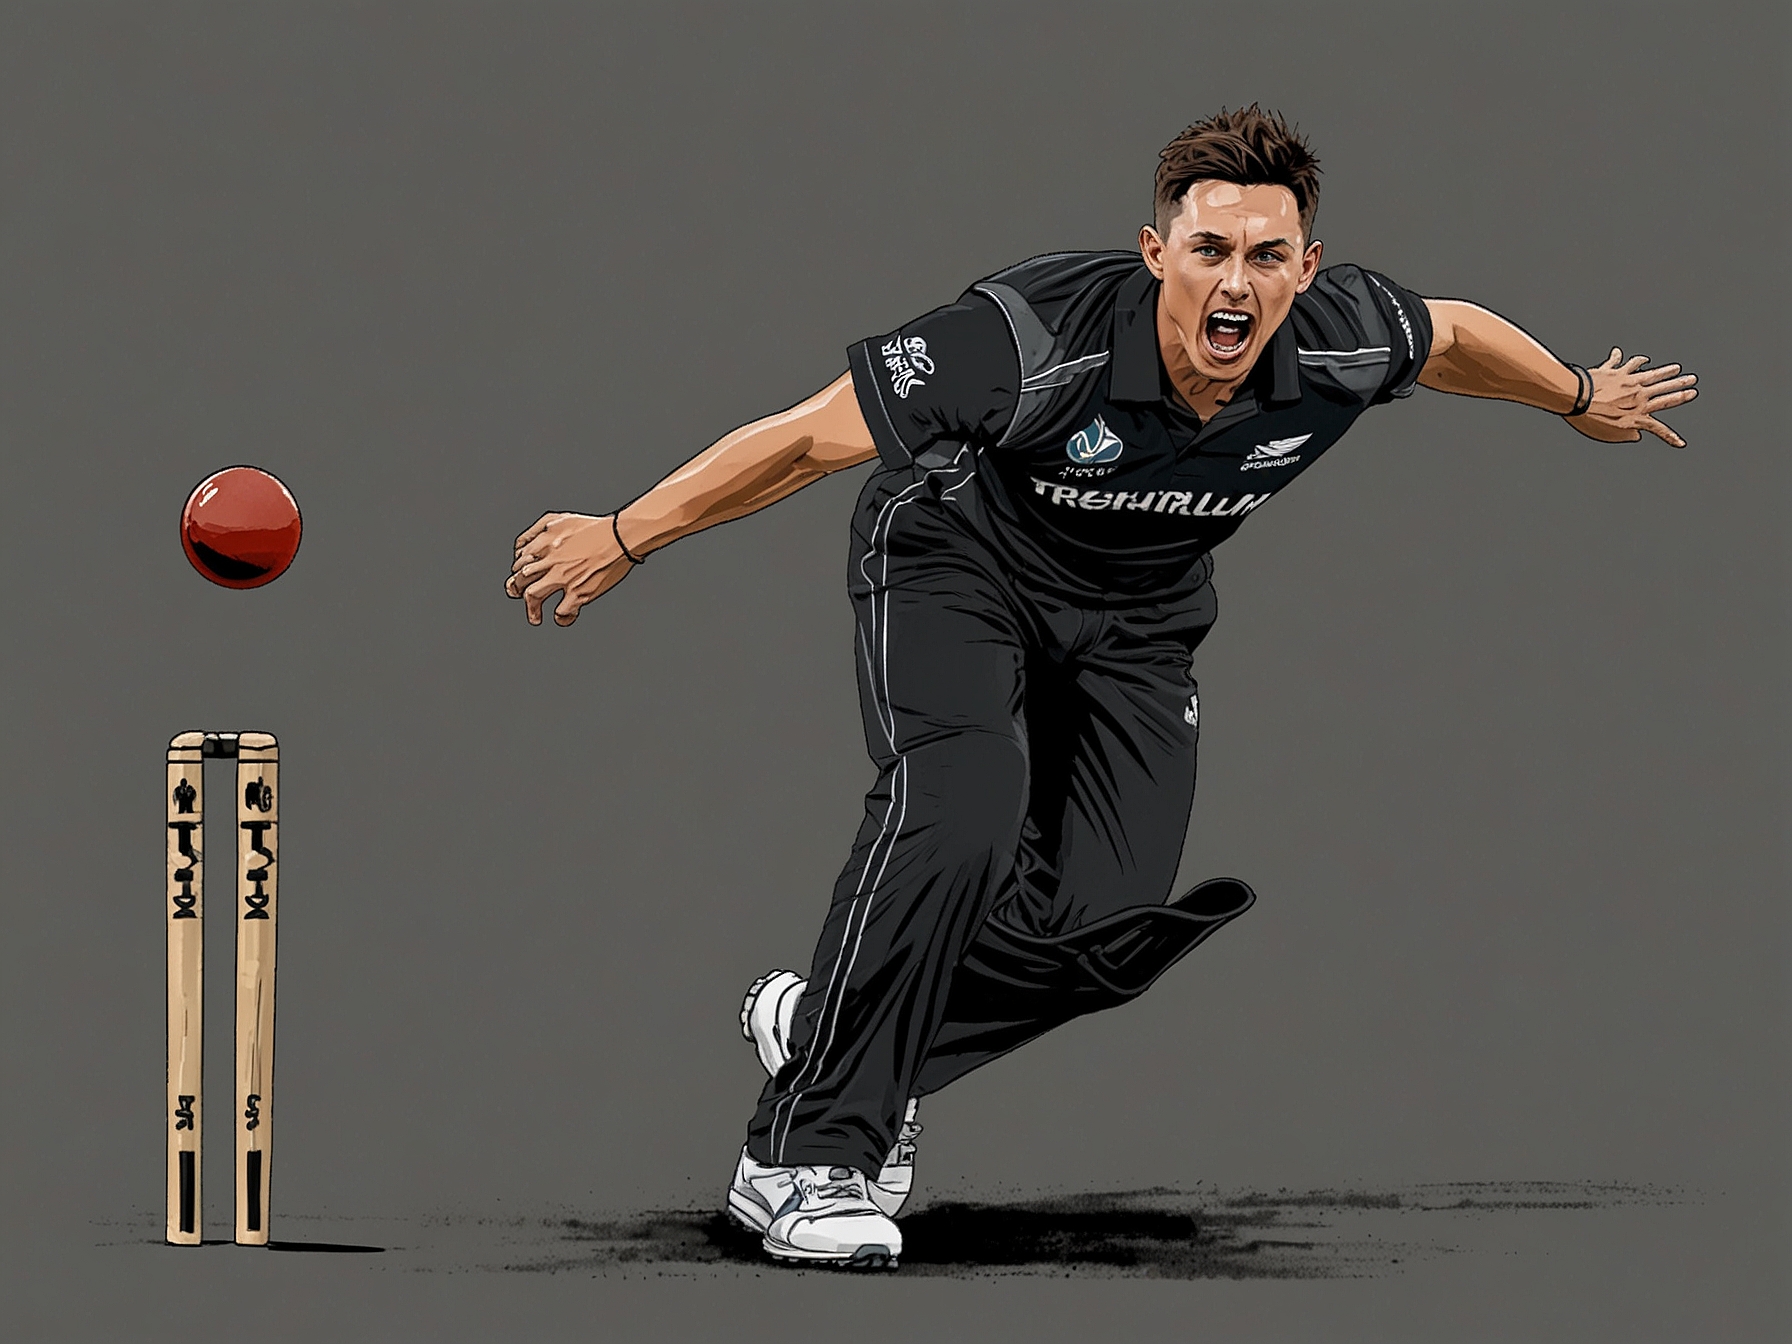 Trent Boult, in action during his last T20 World Cup game, delivering a bowled ball with precision and intensity, showcasing his renowned swing bowling skills for one last time on the grand stage.